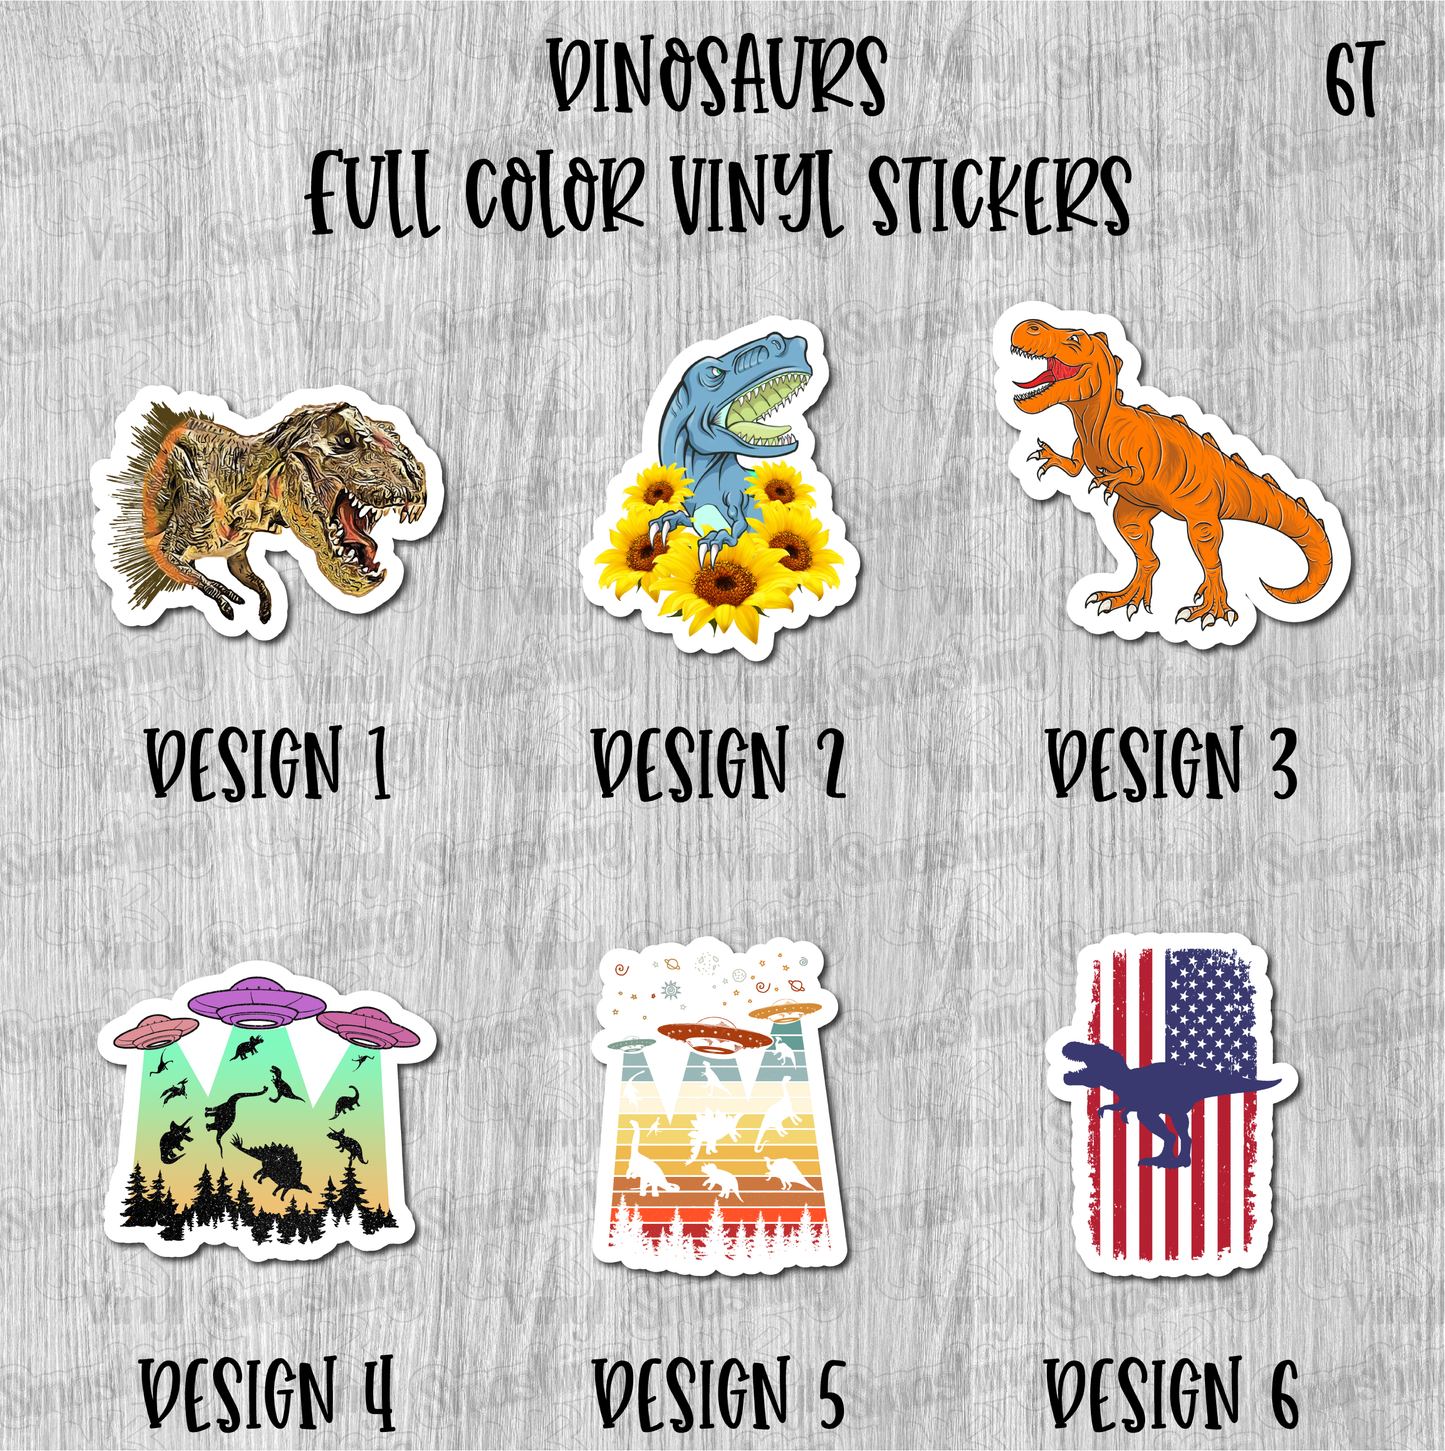 Dinosaurs - Full Color Vinyl Stickers (SHIPS IN 3-7 BUS DAYS)